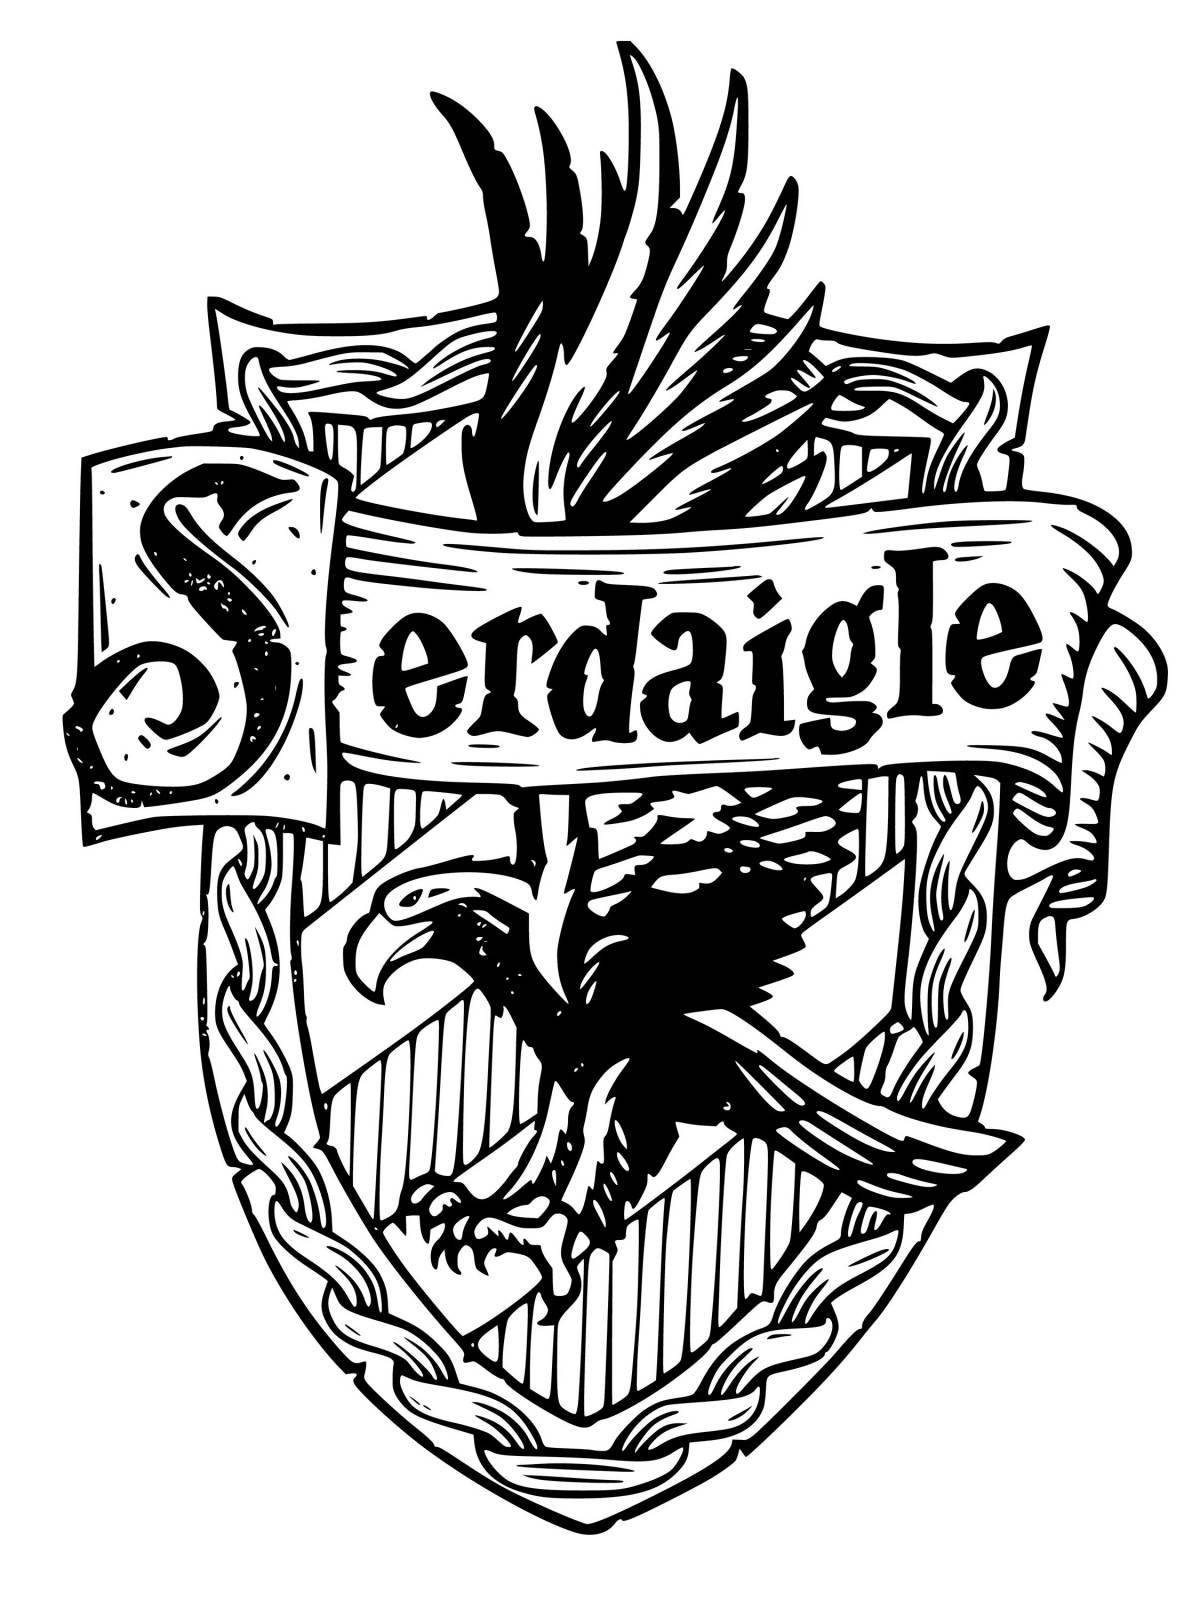 Slytherin coat of arms shiny coloring page